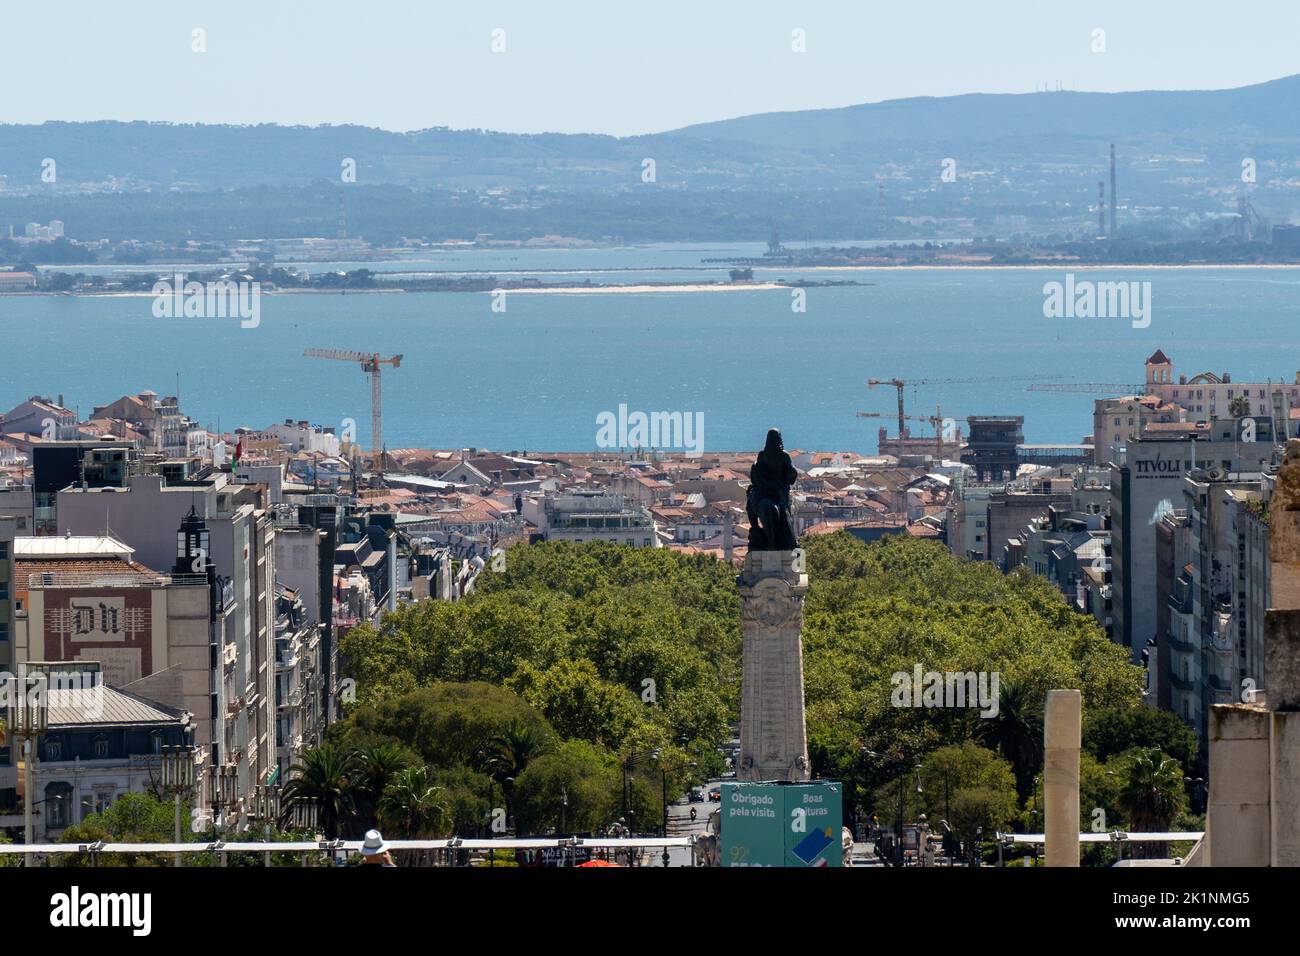 Lisbon, Portugal - September 2022: View of the river Tagus and Lisbon as seen from the top of Parque Eduardo VII in Lisbon. Stock Photo